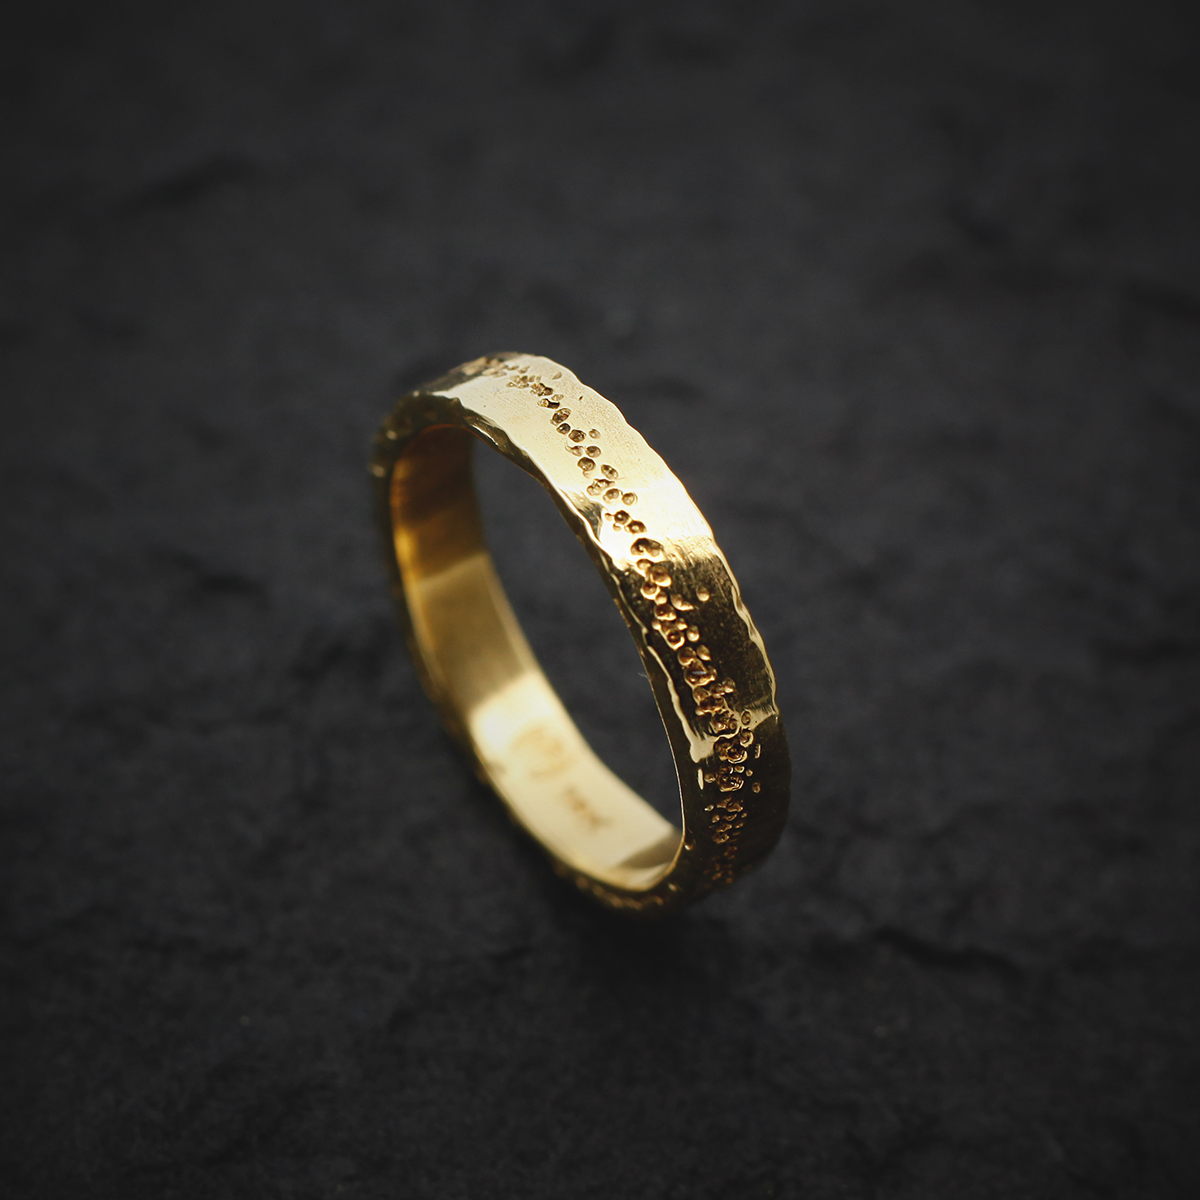 Golden wedding ring with original line in the band